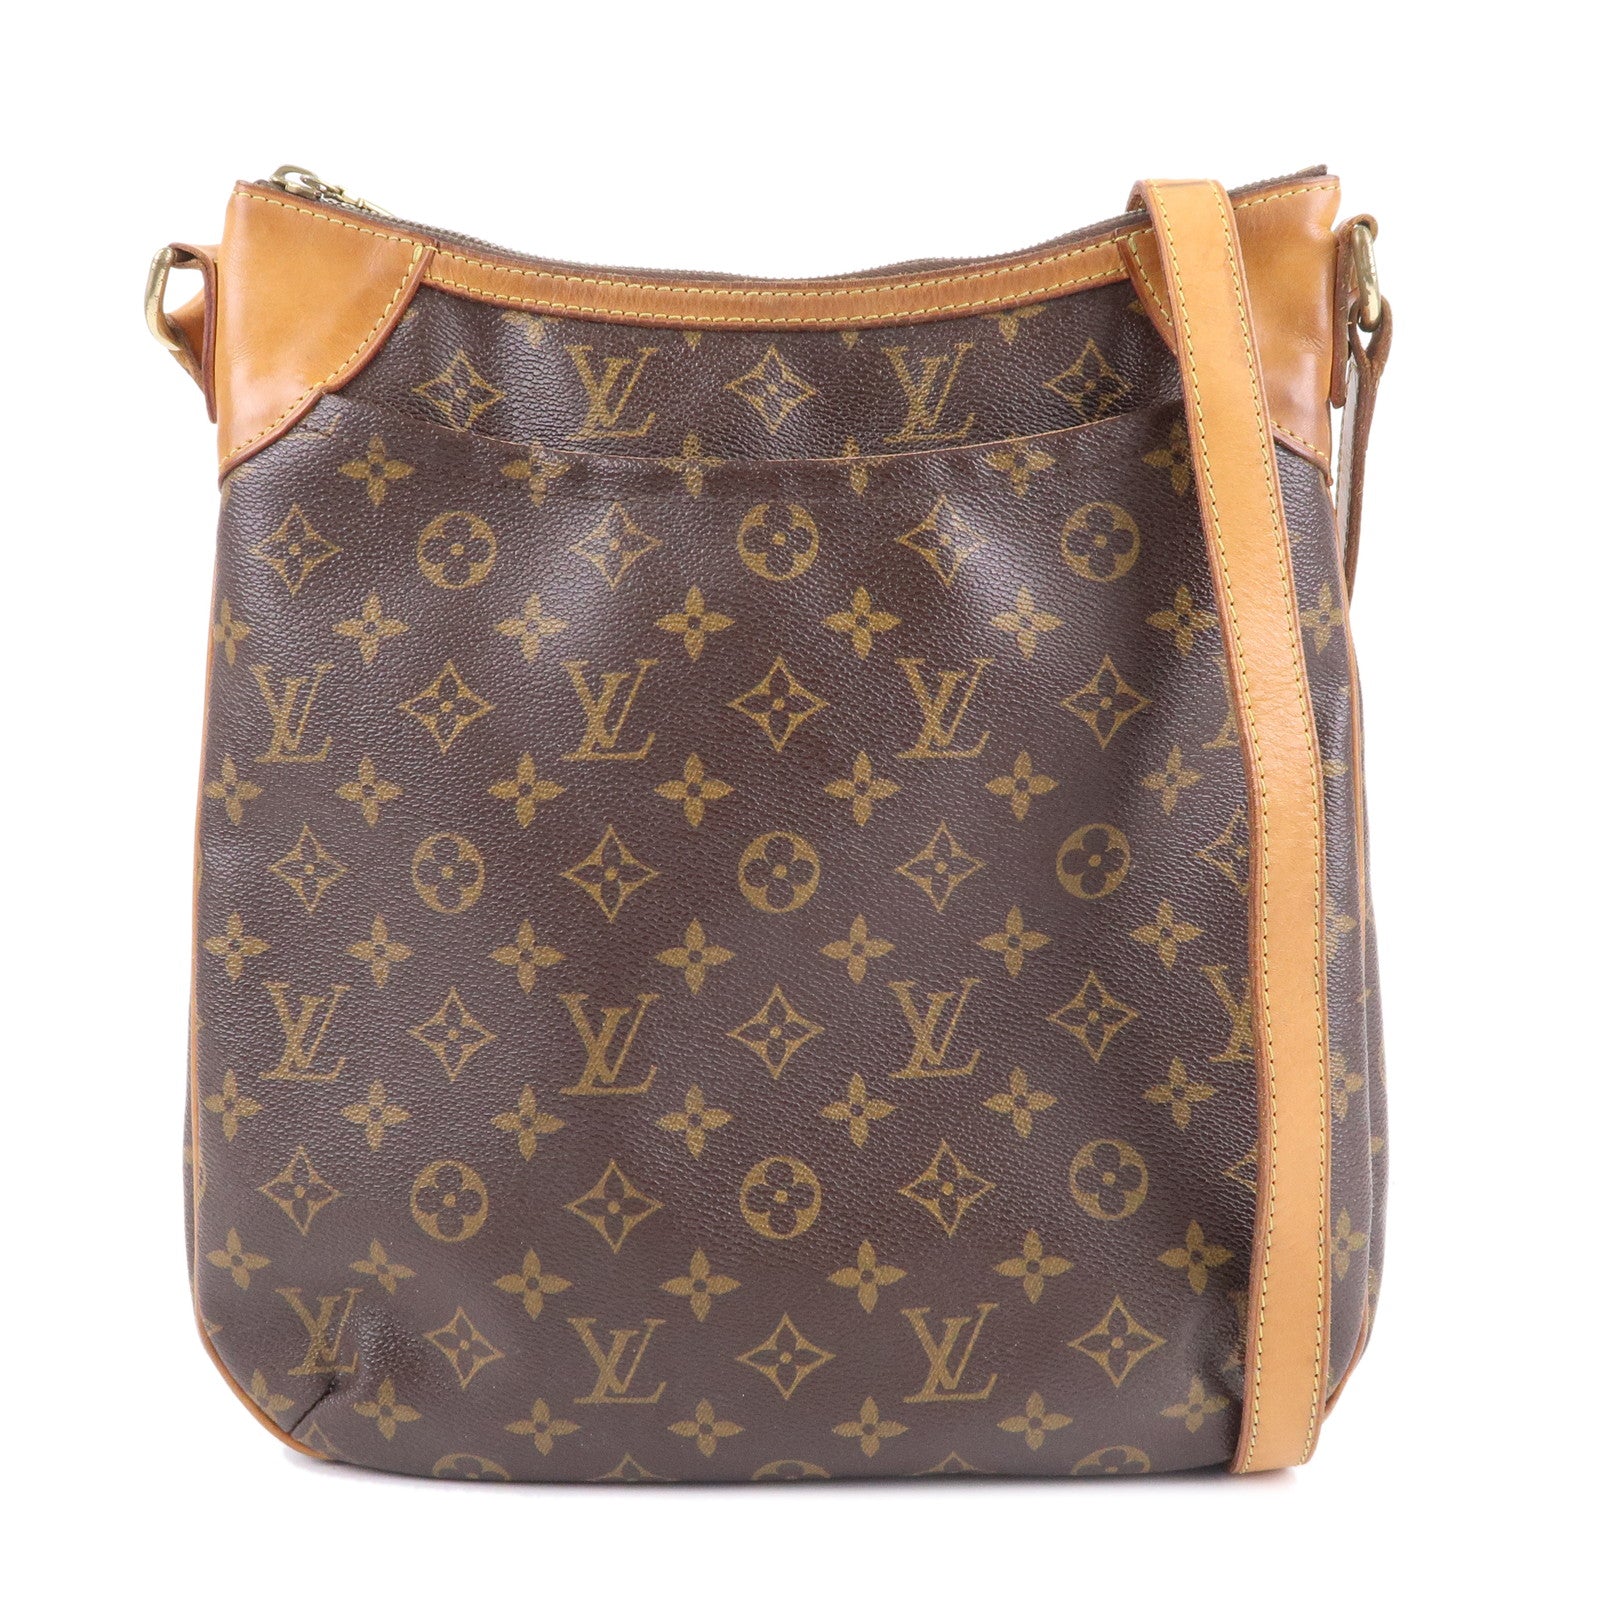 Odeon MM louis vuitton monogram and black leather bag in new